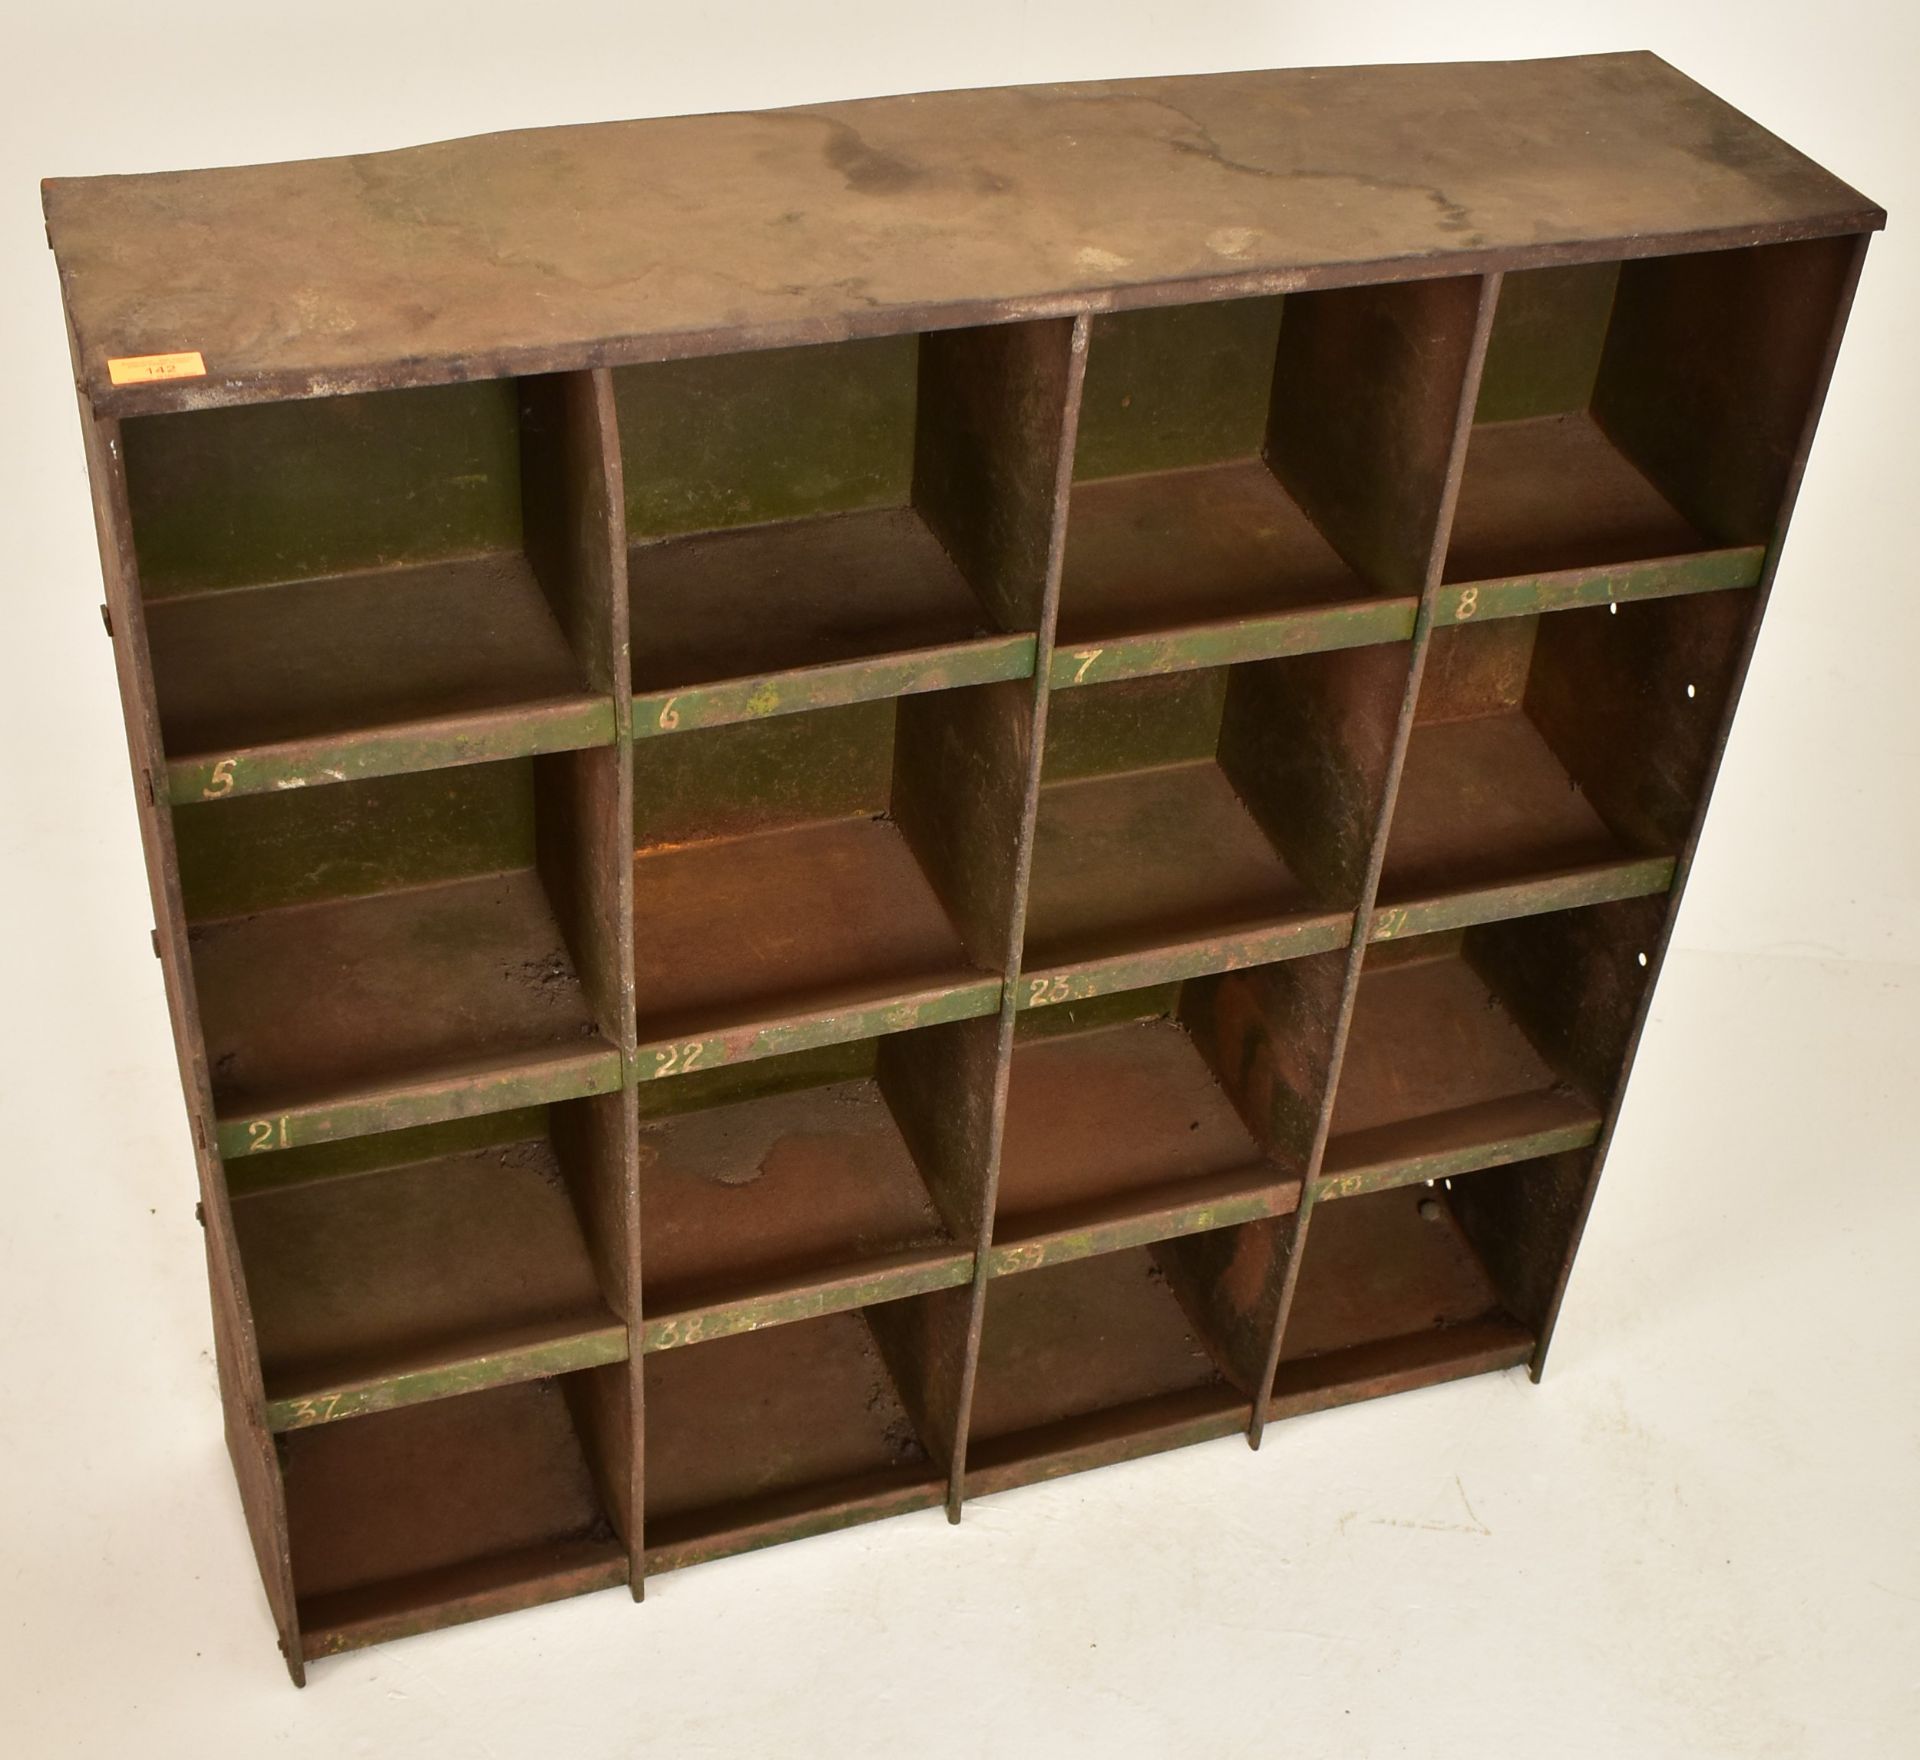 VINTAGE 20TH CENTURY INDUSTRIAL PIGEON HOLE CABINET - Image 2 of 4